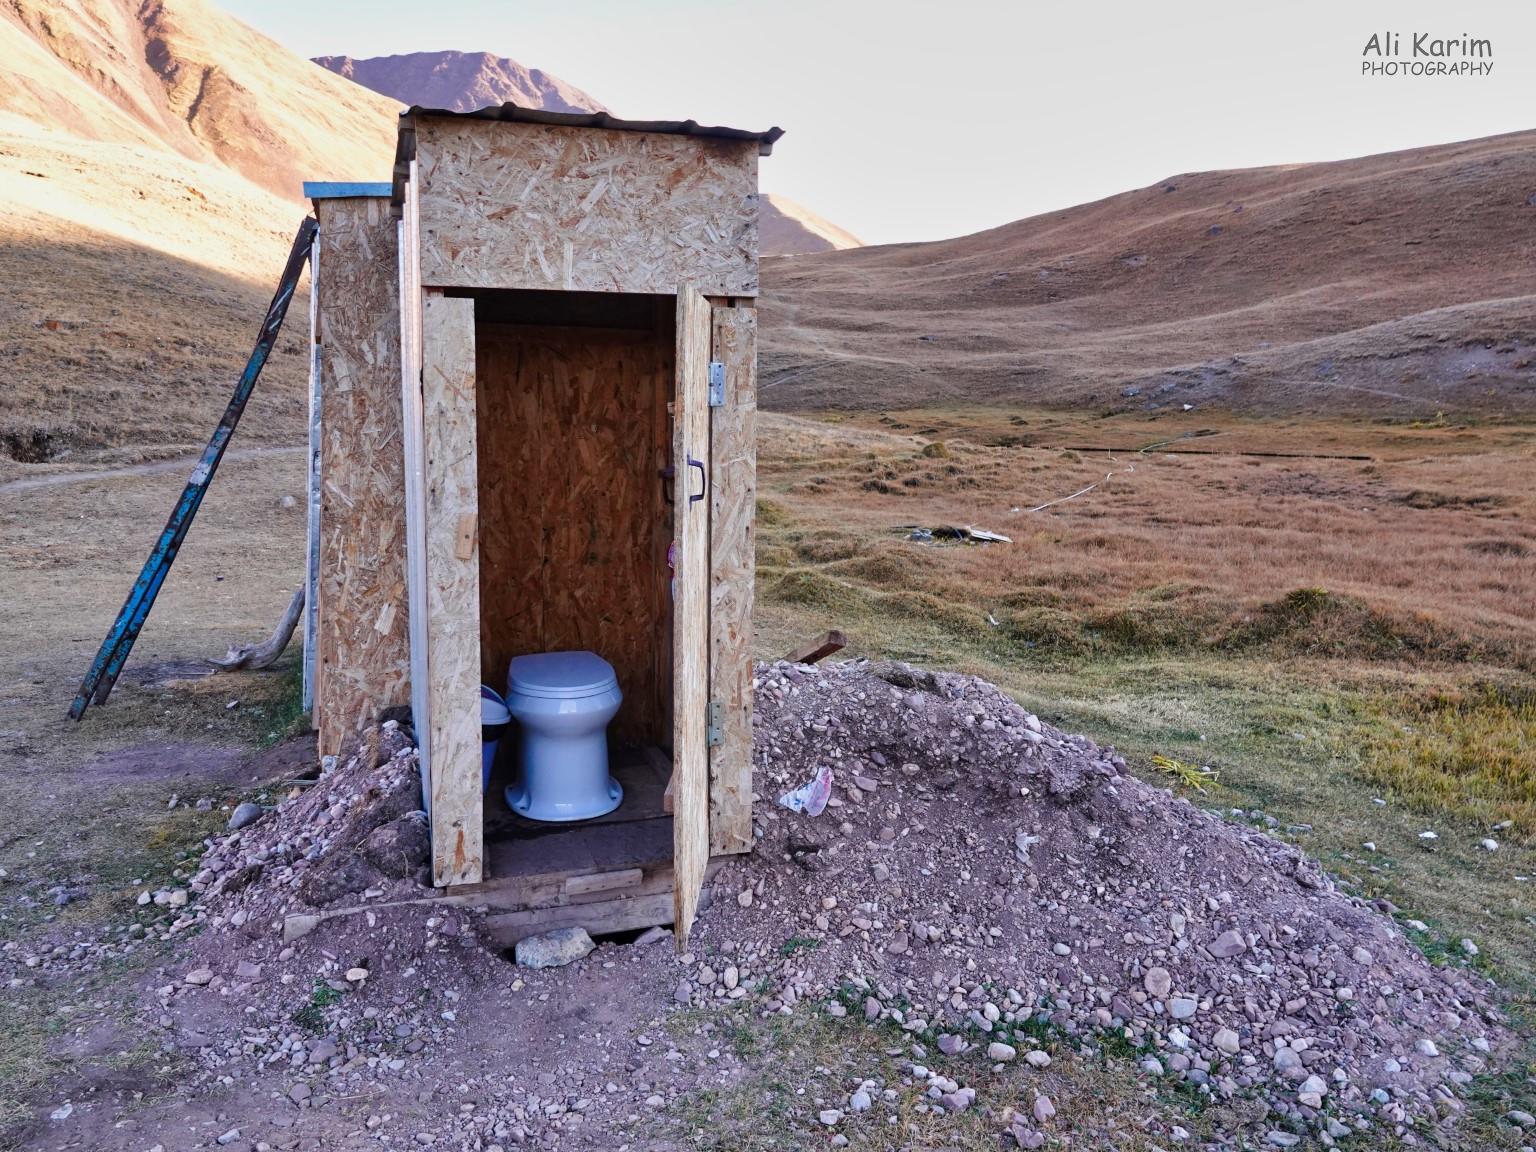 Silk Road 16: More Osh, Kyrgyzstan ”Western” toilet, which was just a hole in the ground with a raised seat